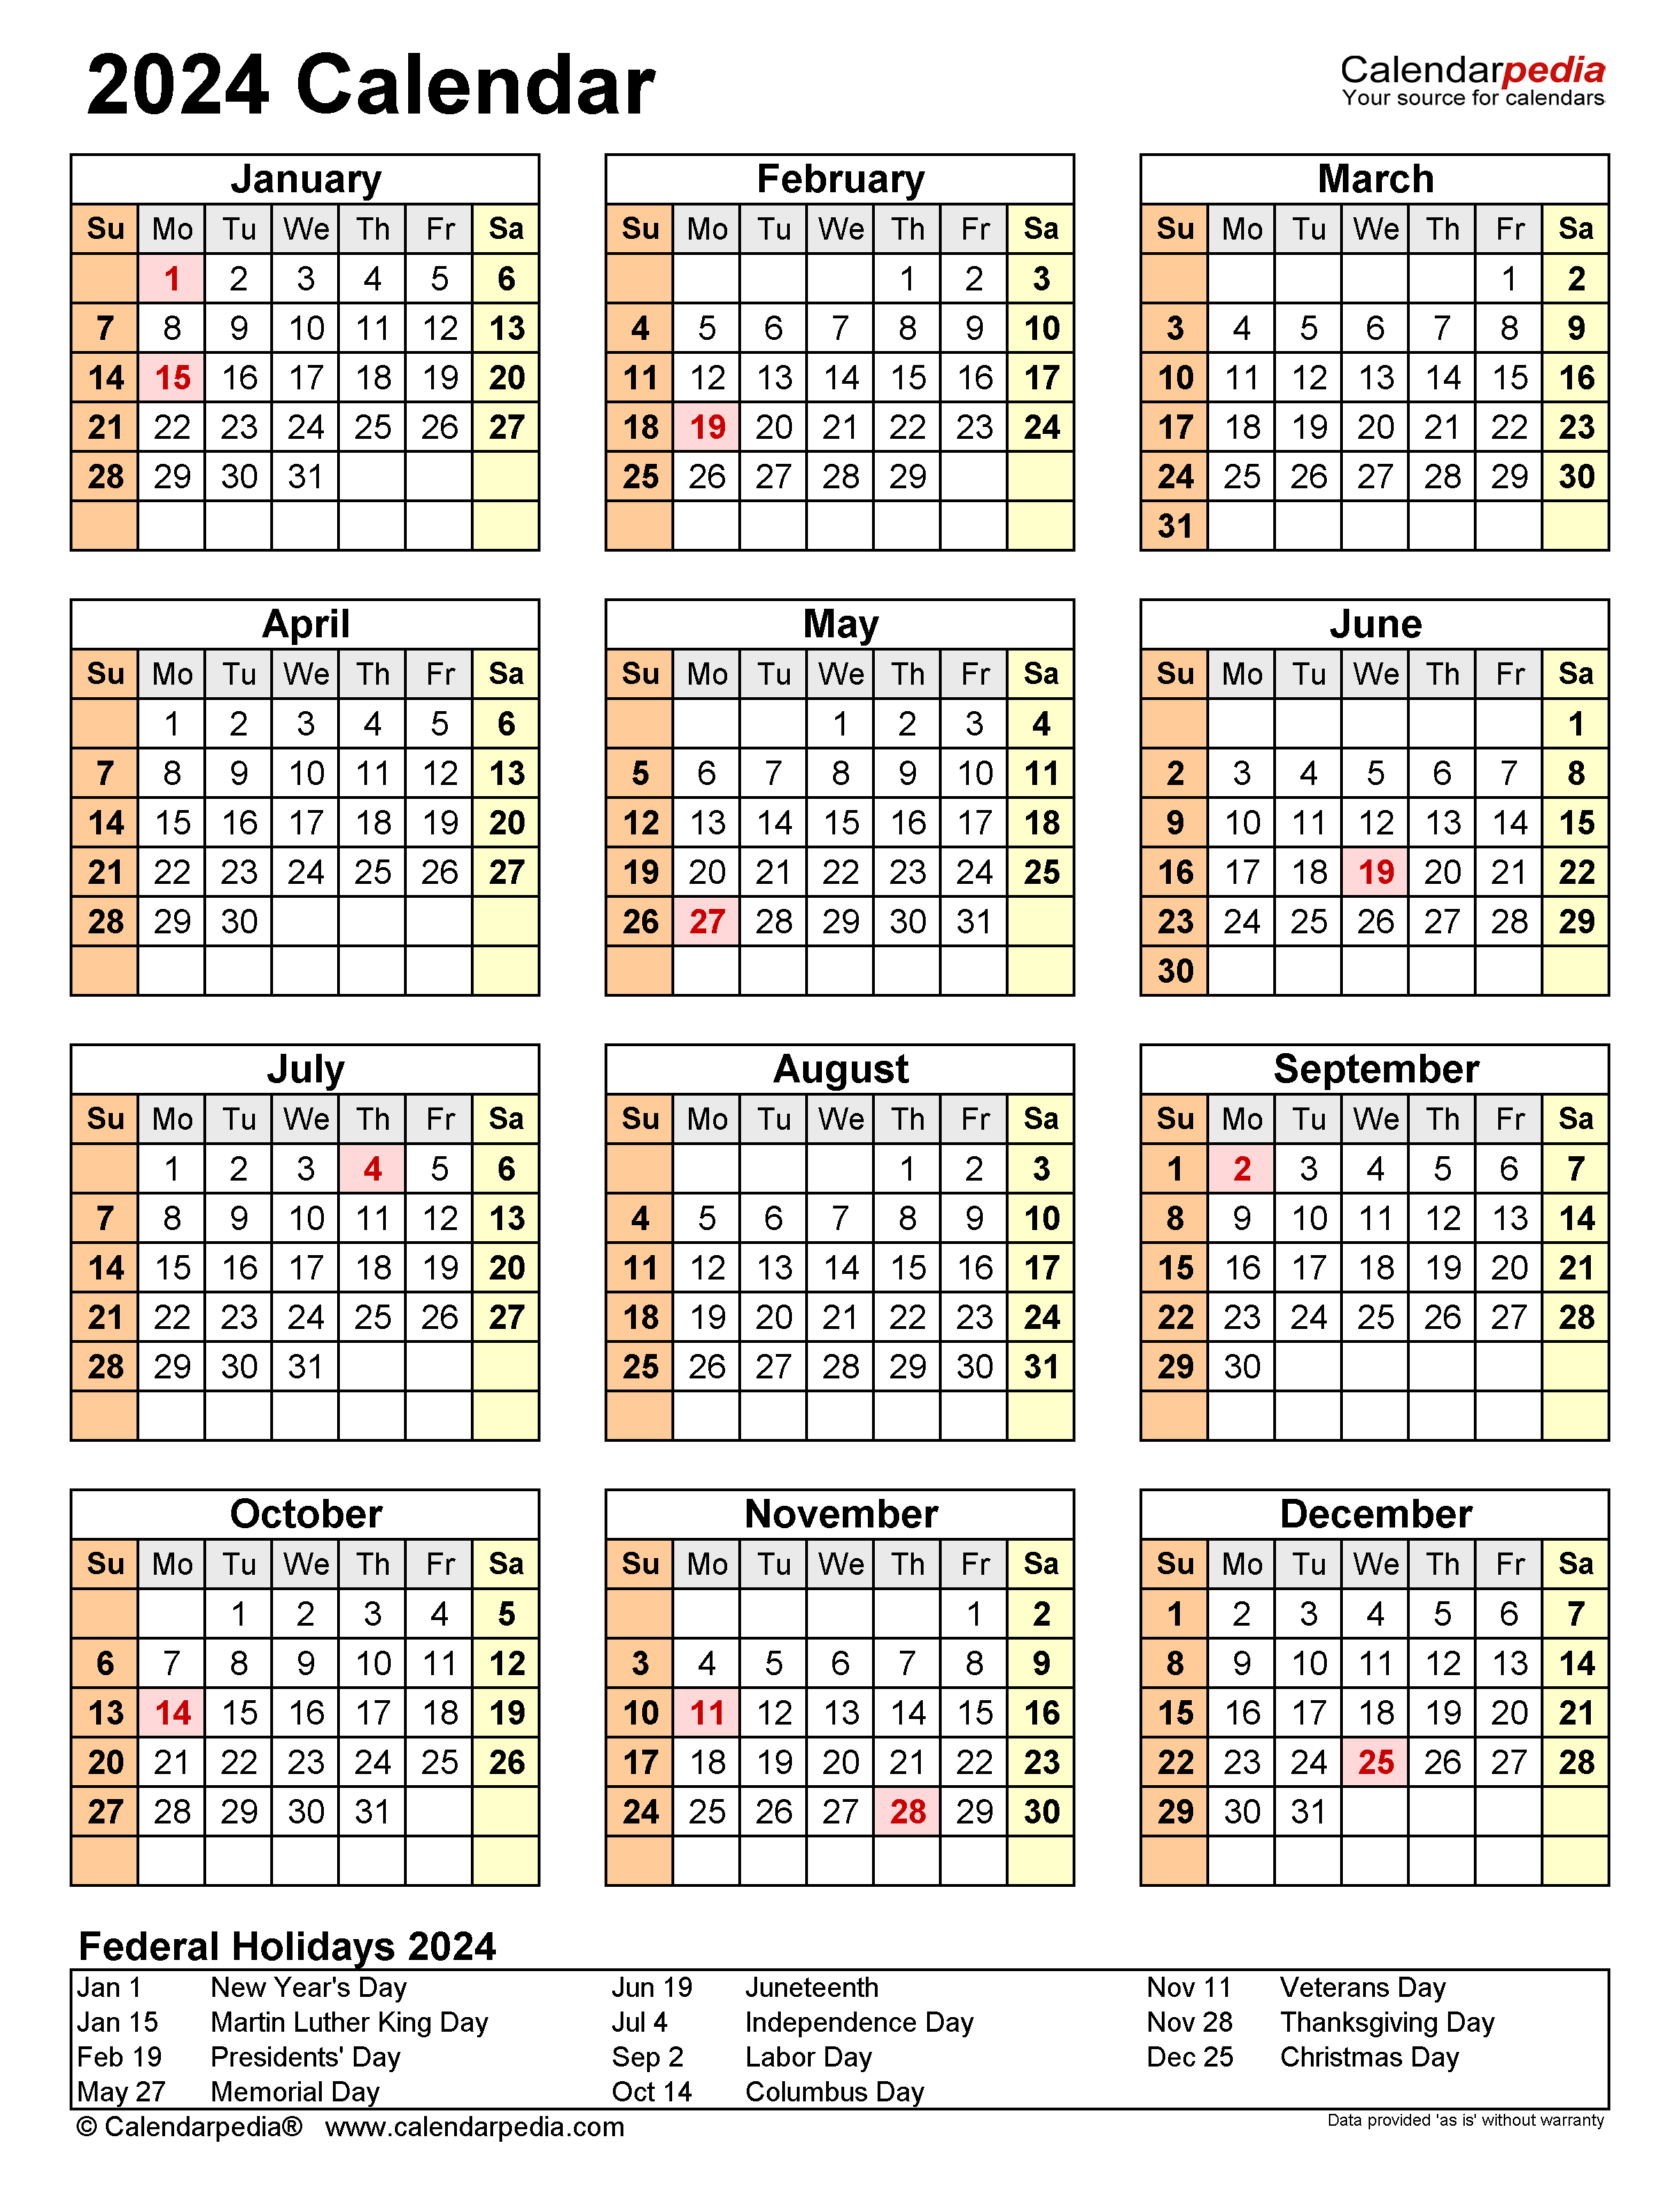 2024 Calendar Templates And Images 2024 Yearly Calendar Free - Free Printable Calendar 2024 With Large Numbers